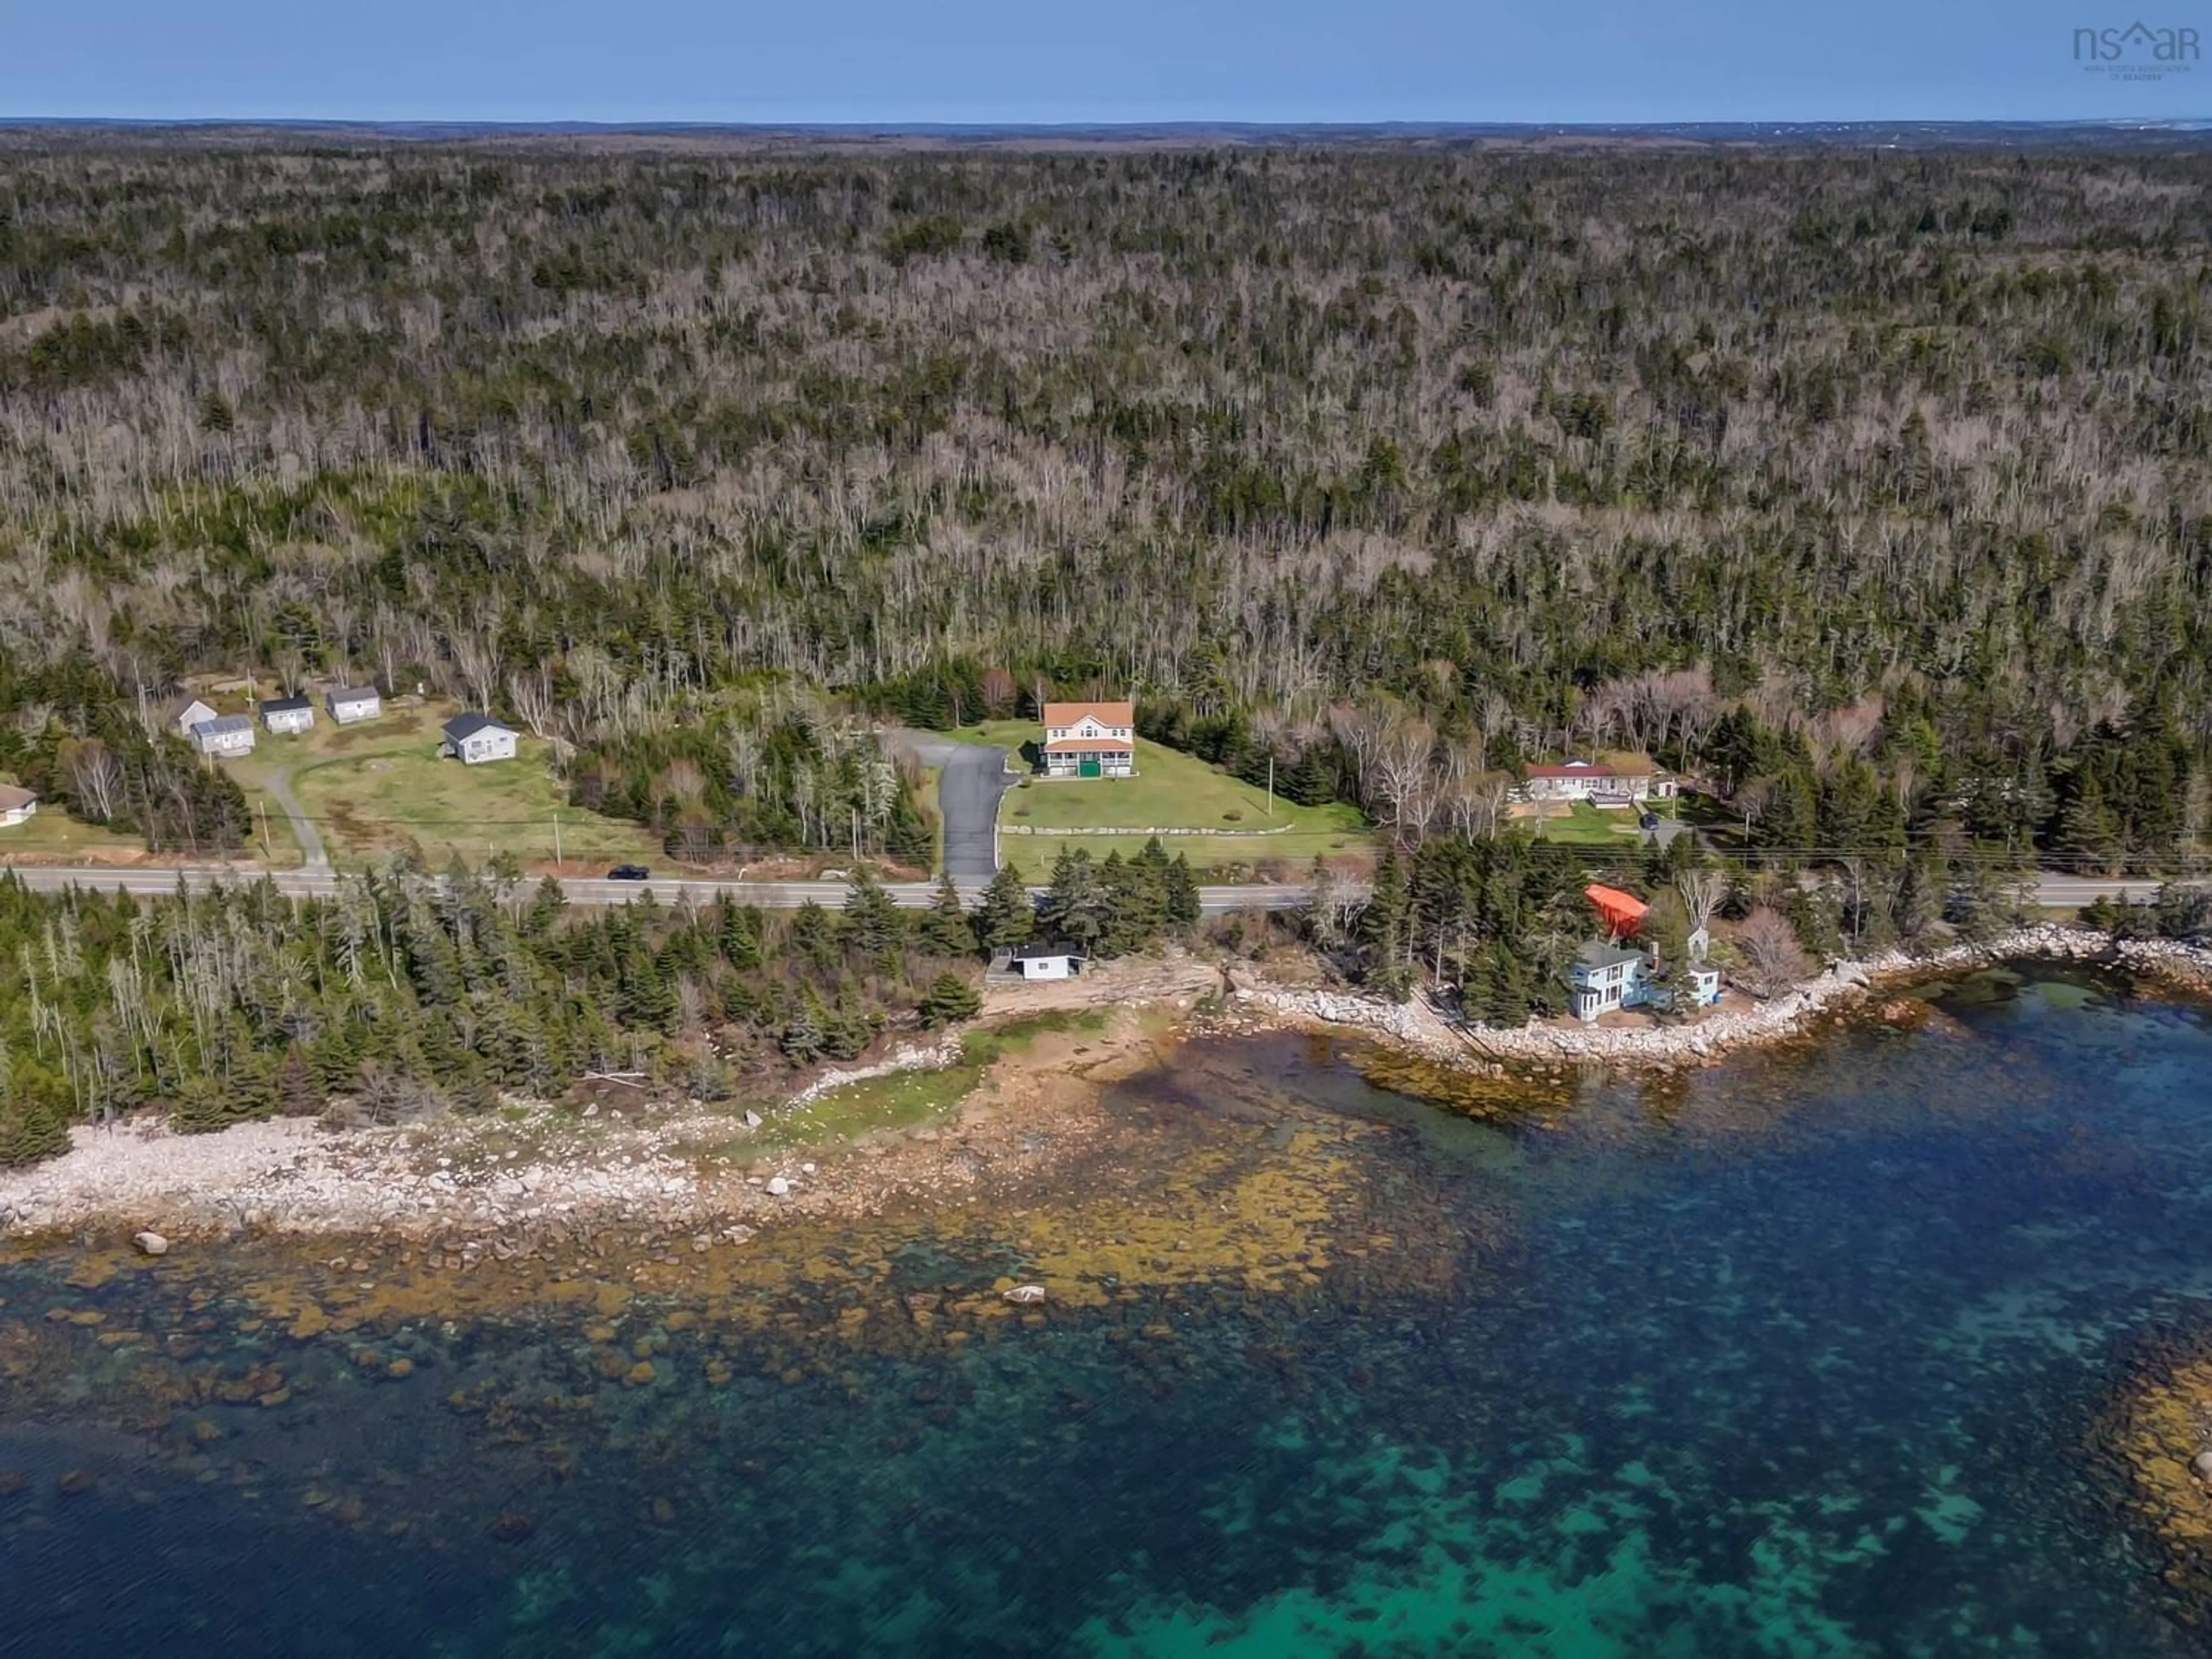 Cottage for 9085 Peggys Cove Rd, Indian Harbour Nova Scotia B3Z 3N4